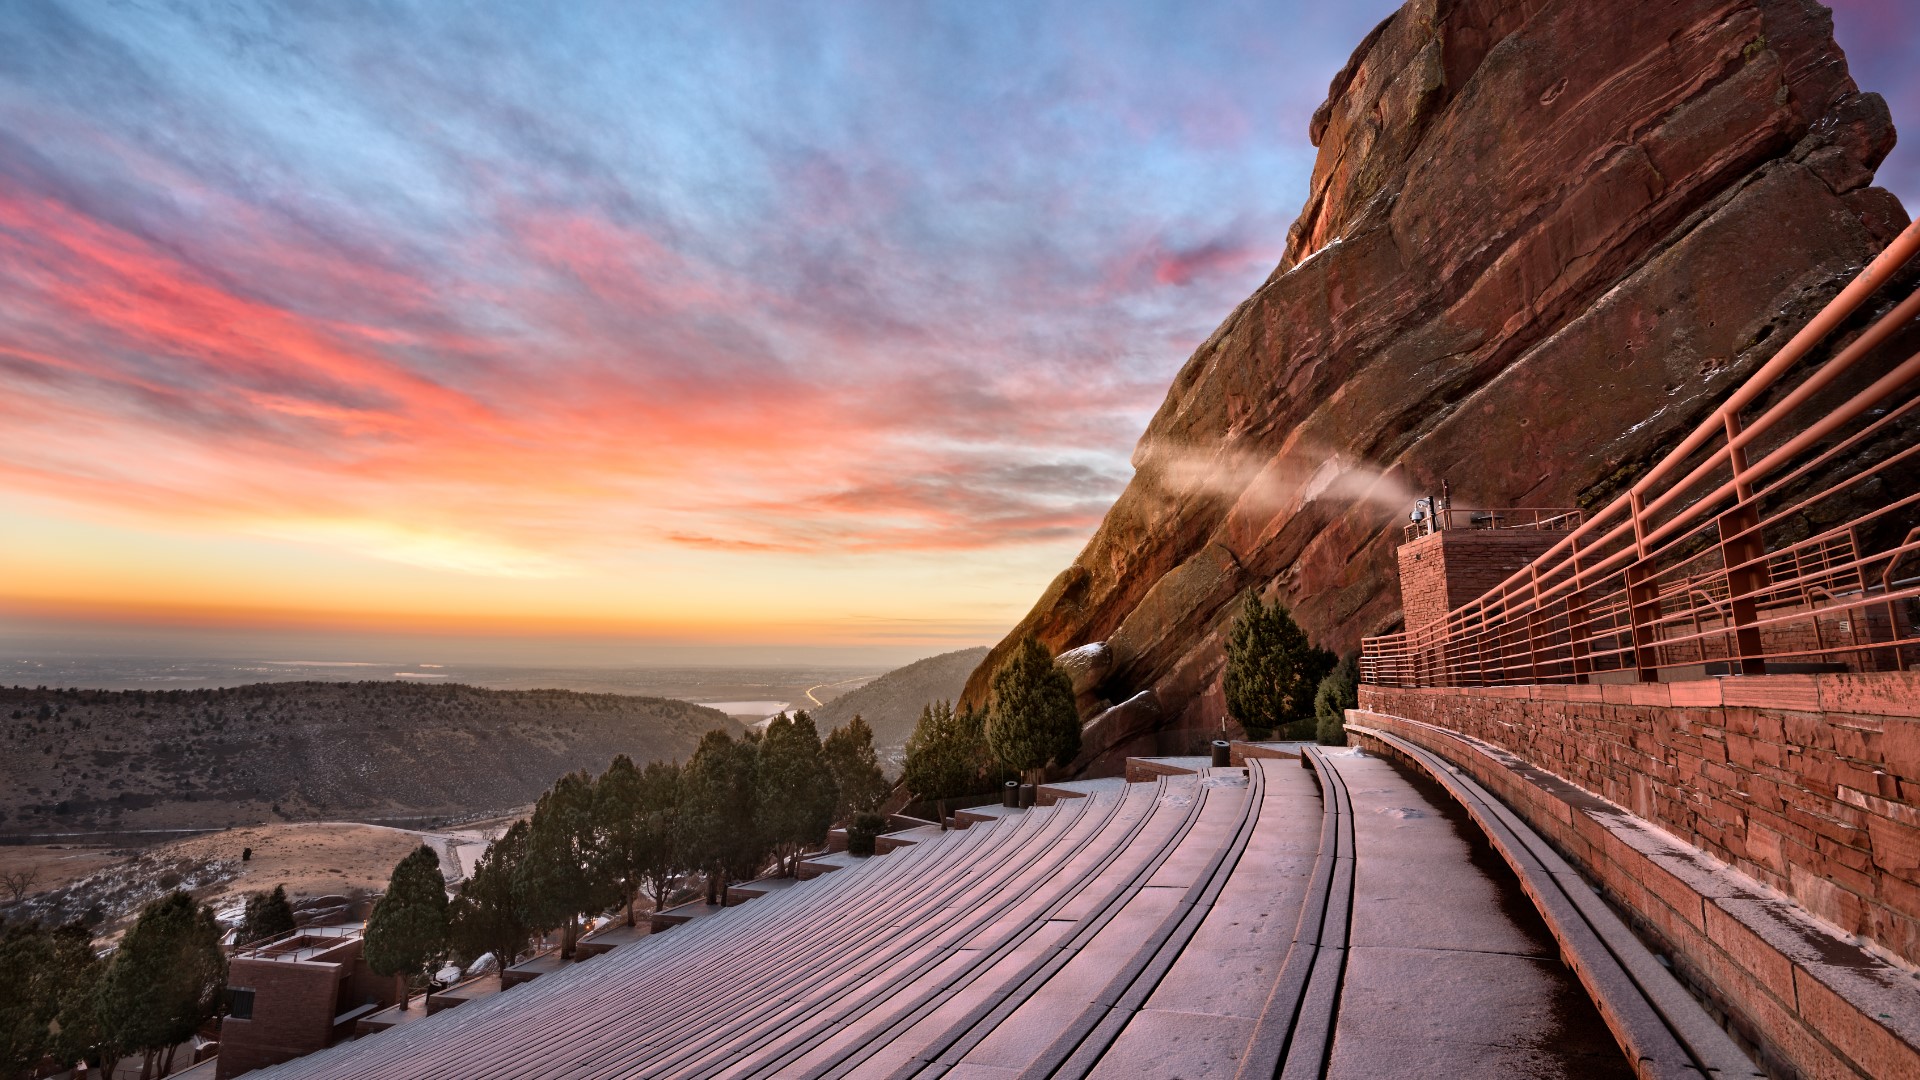 Since 1906, Red Rocks Amphitheatre in Morrison, Colorado, has hosted some of the world's top musicians. With incredible acoustics and one-of-a-kind scenery, the venue is a true Colorado sight.